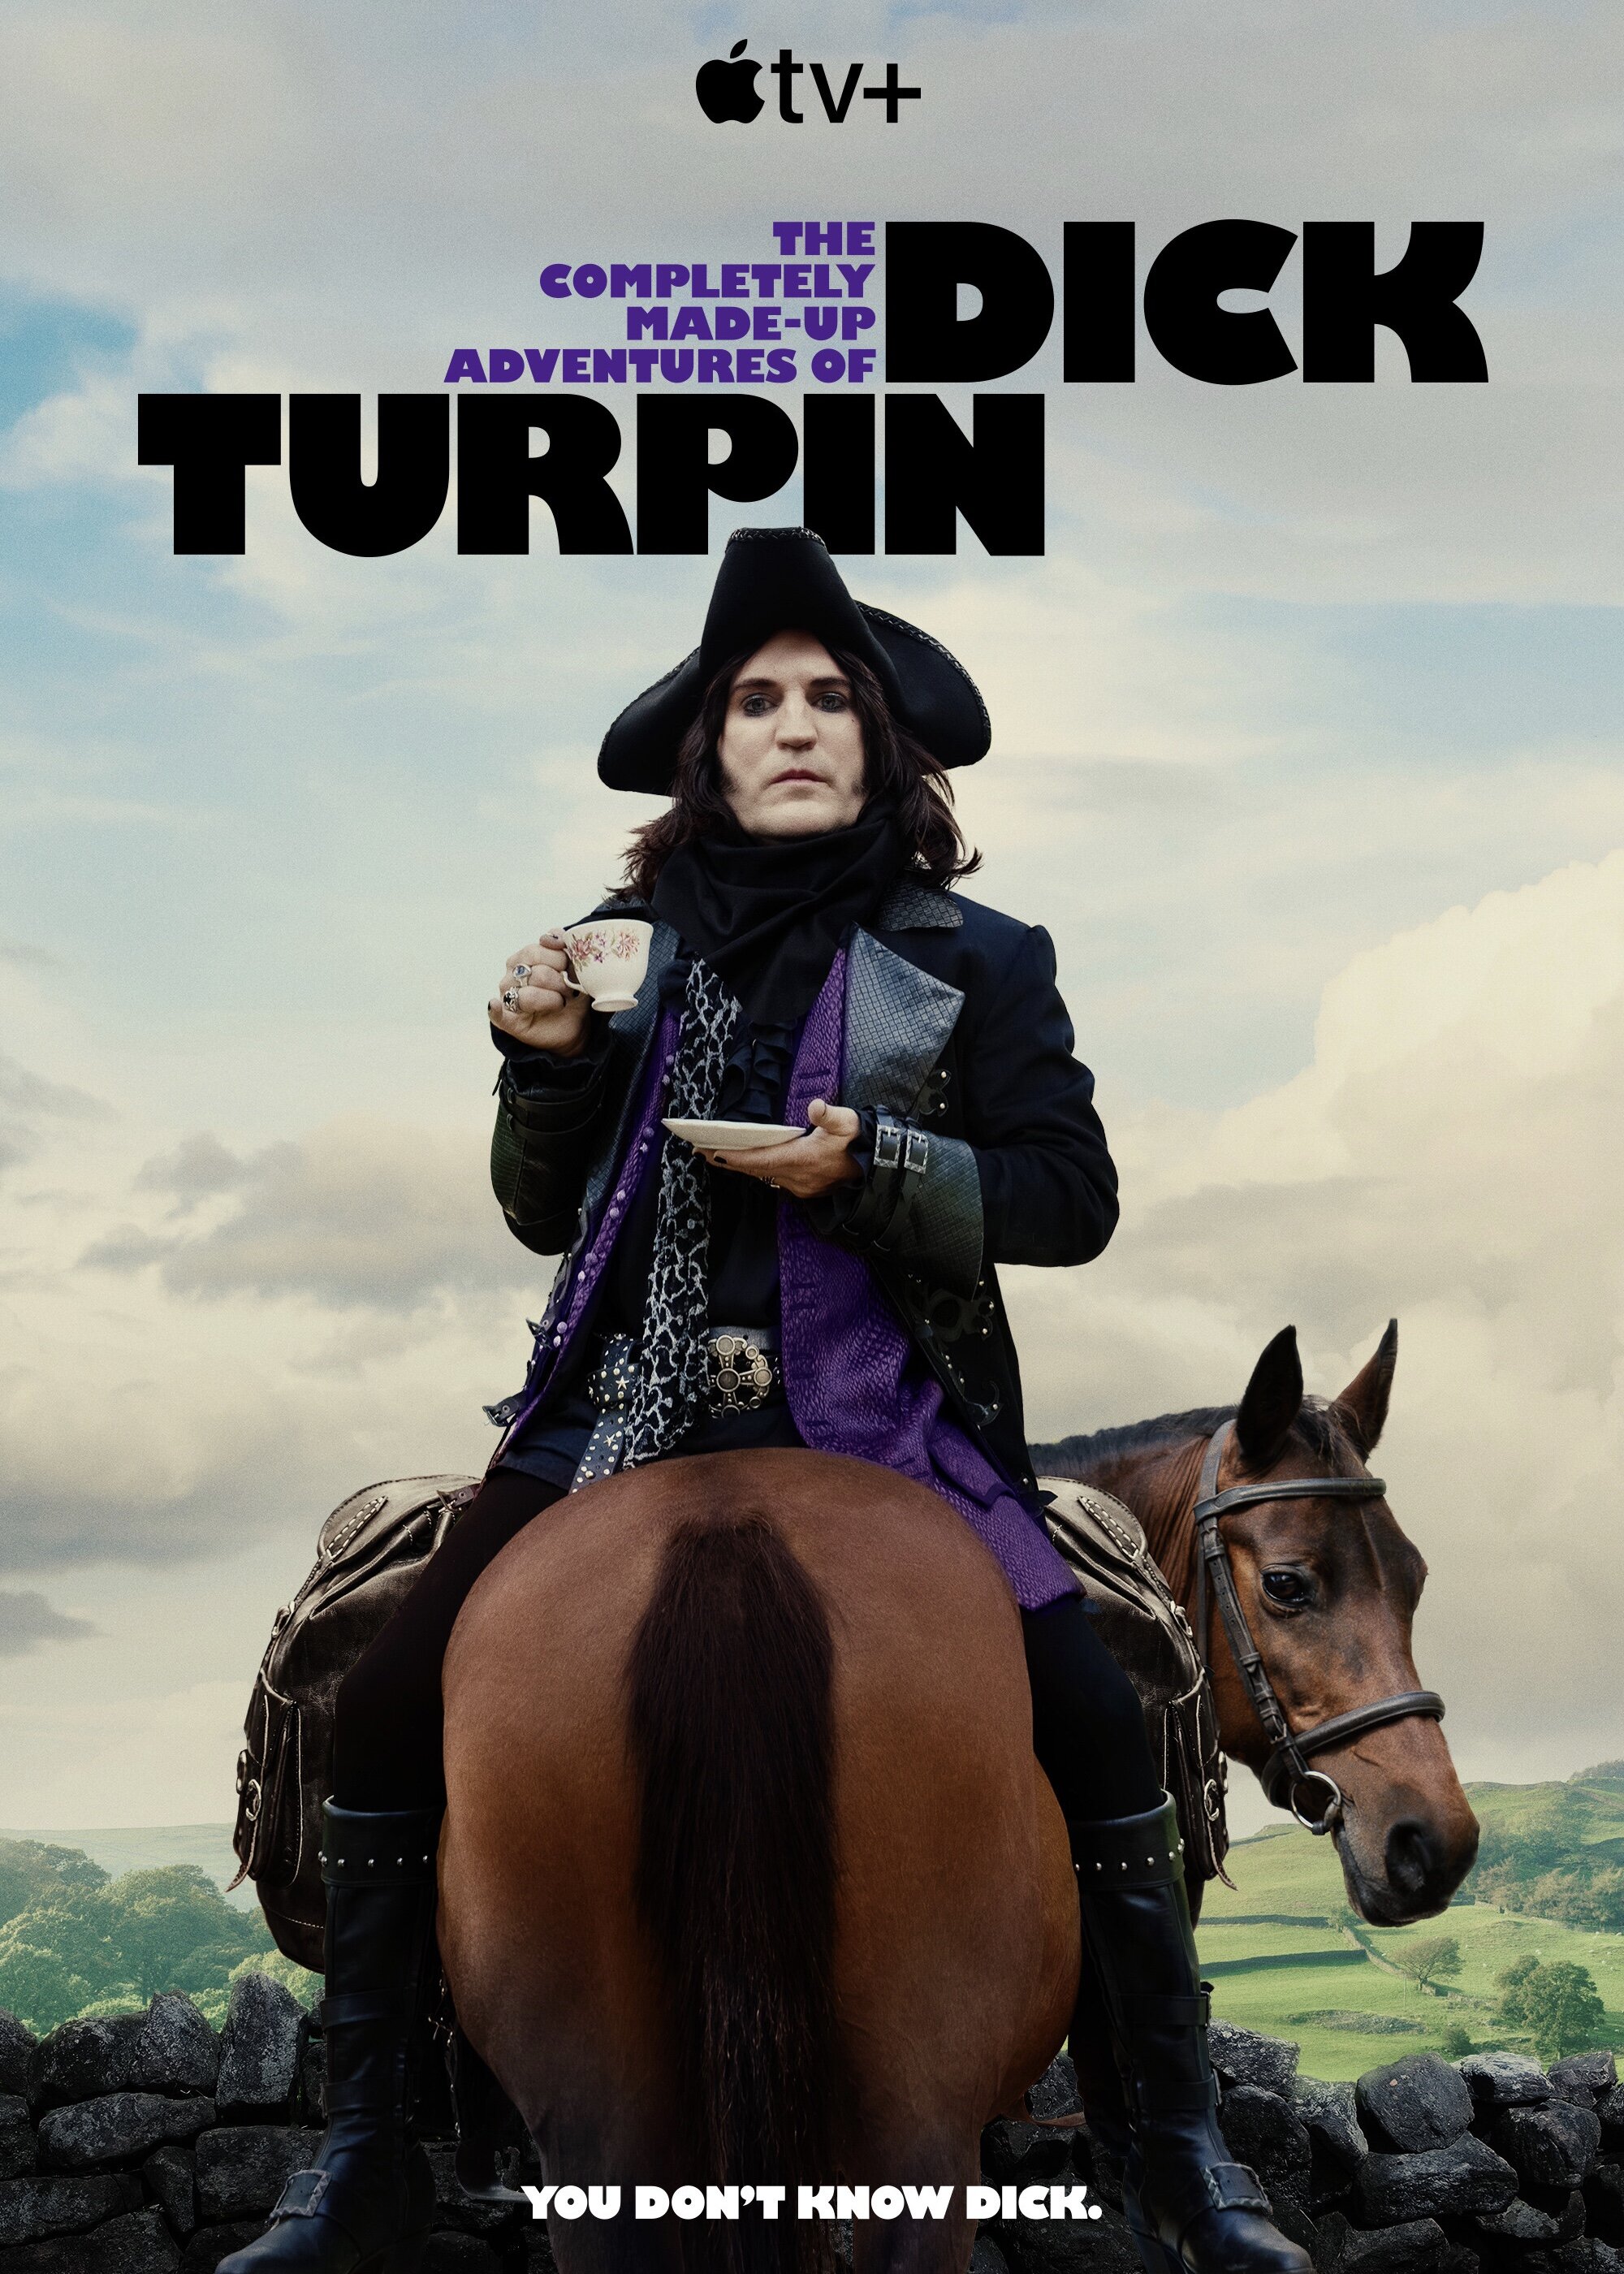 The Completely Made-Up Adventures of Dick Turpin ne zaman